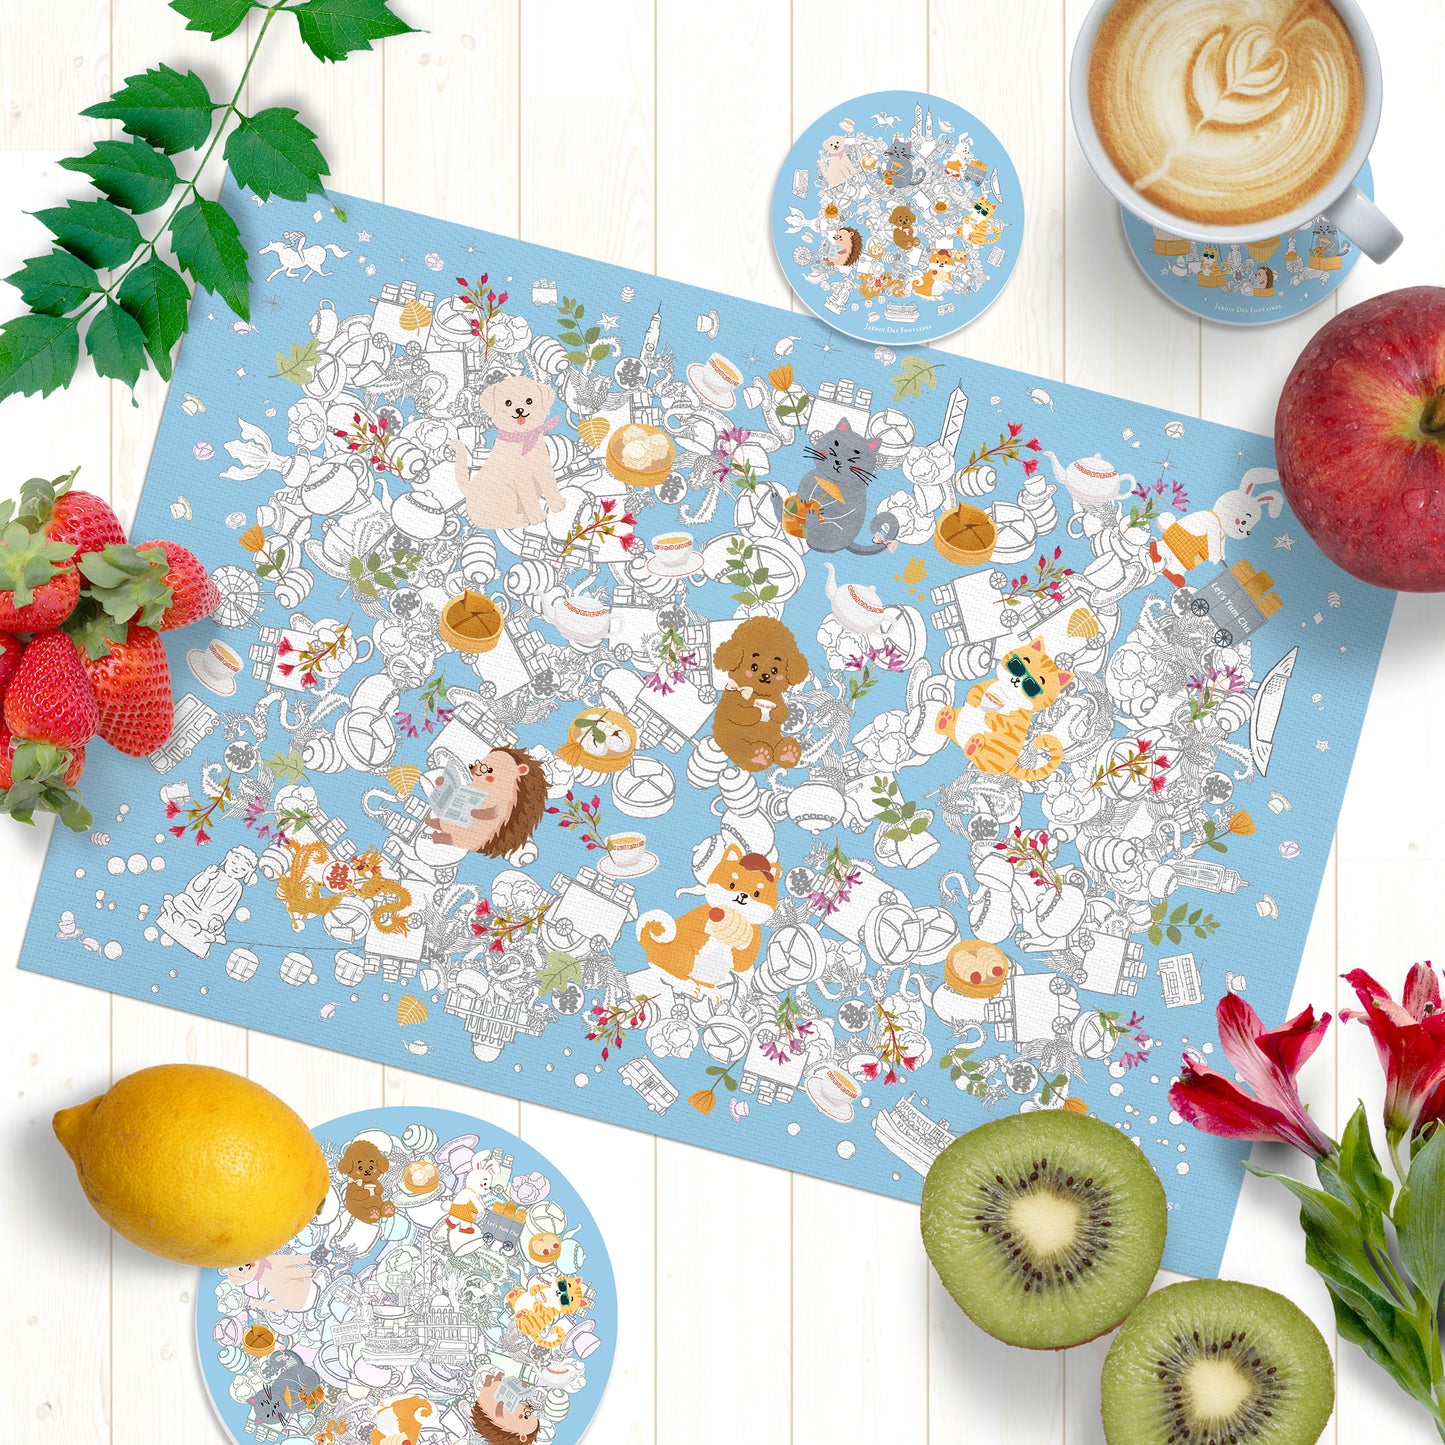 "Let's Yum Cha" Woven Table Placemat